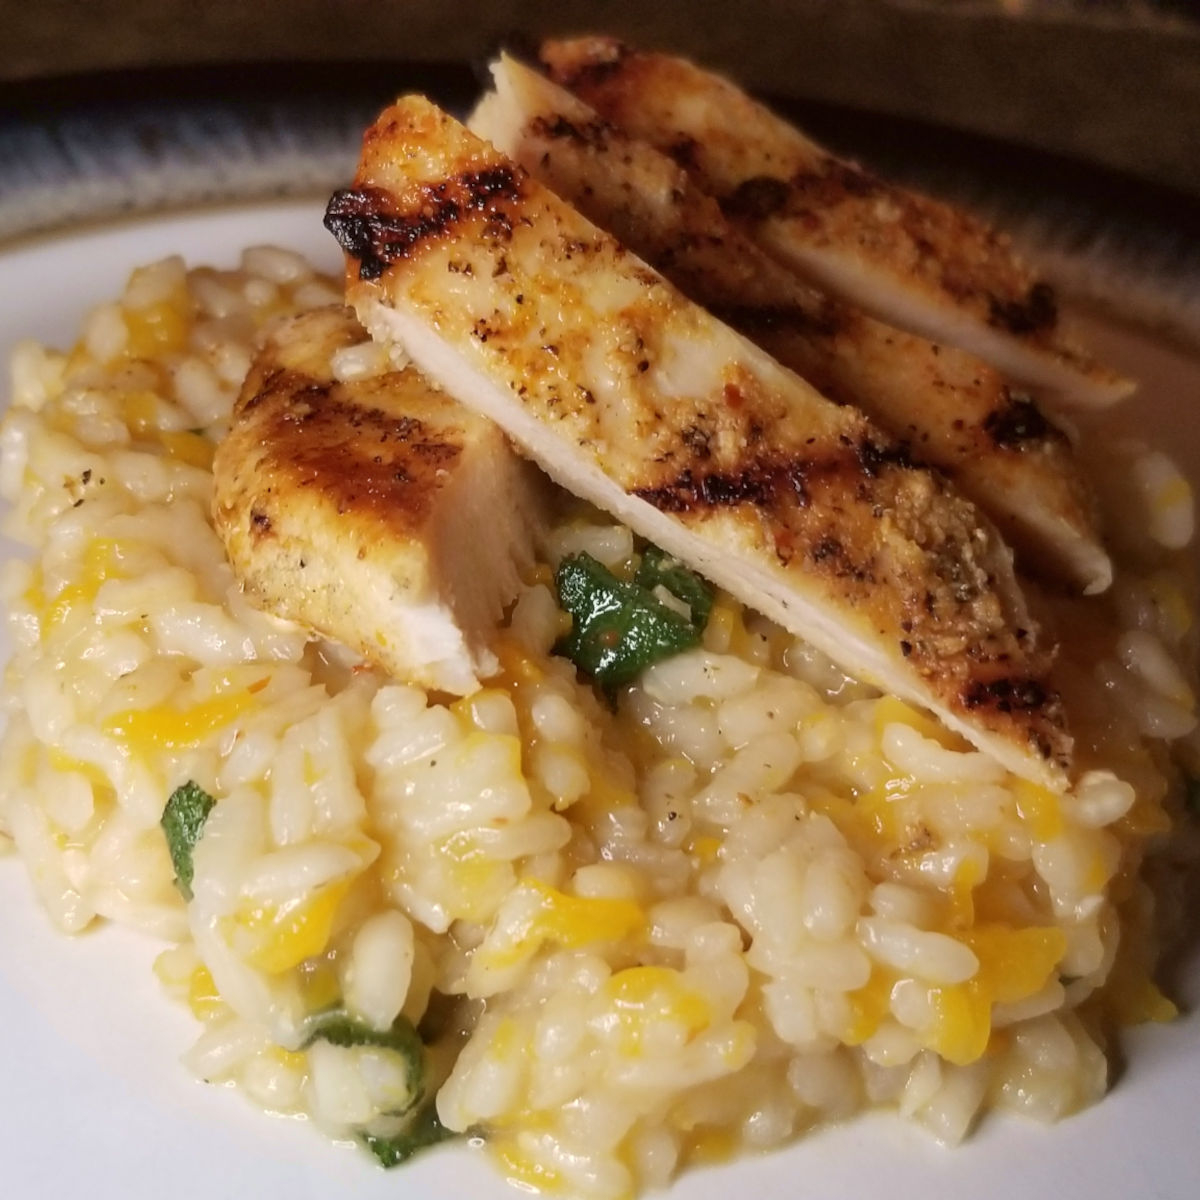 Sliced chicken served over butternut squash risotto.